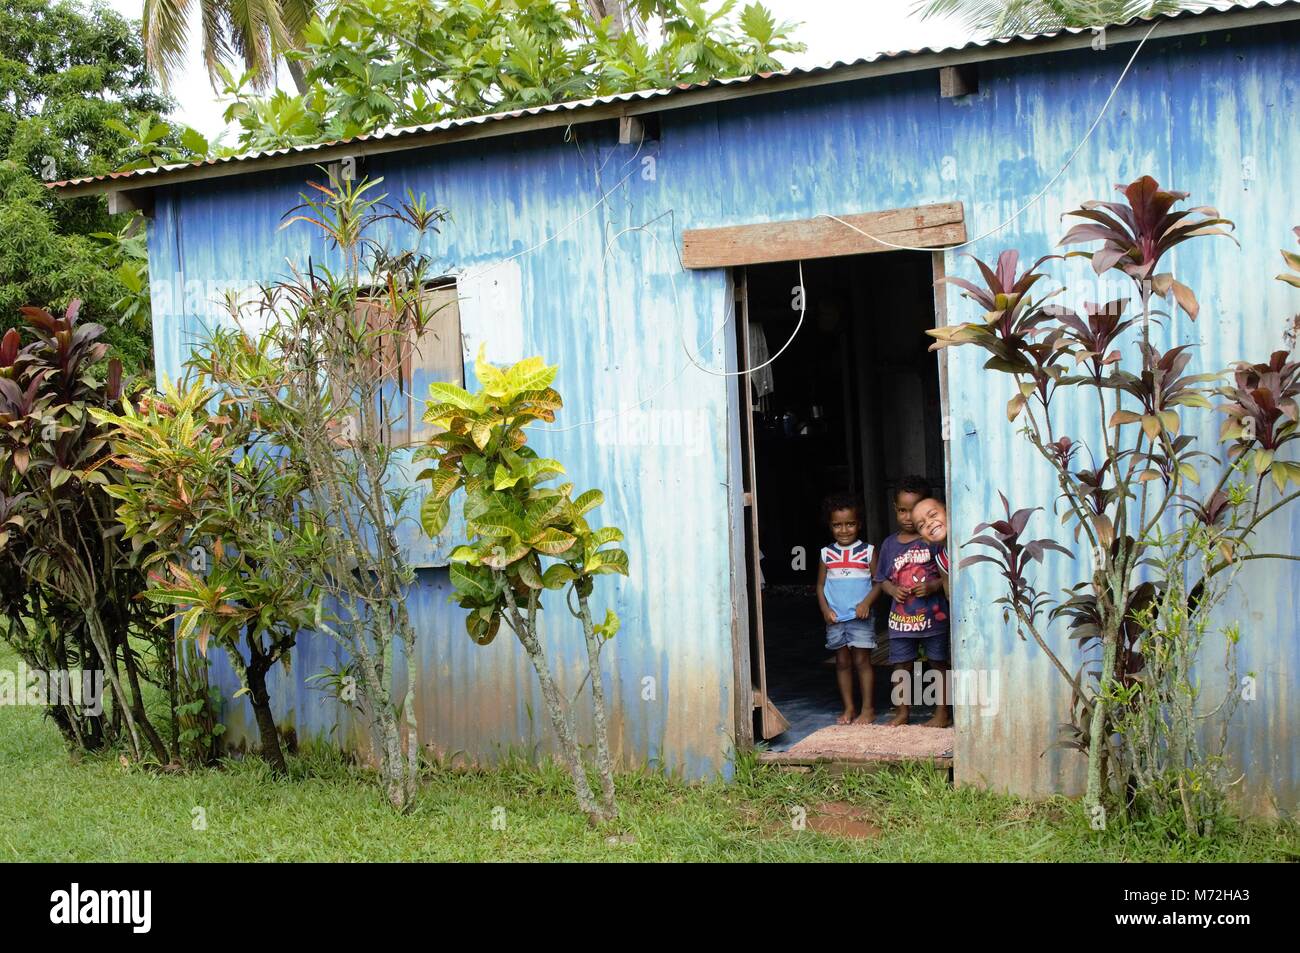 Children pose in the doorway of their simple home constructed of corrugated iron in a village outside Nadi. Stock Photo